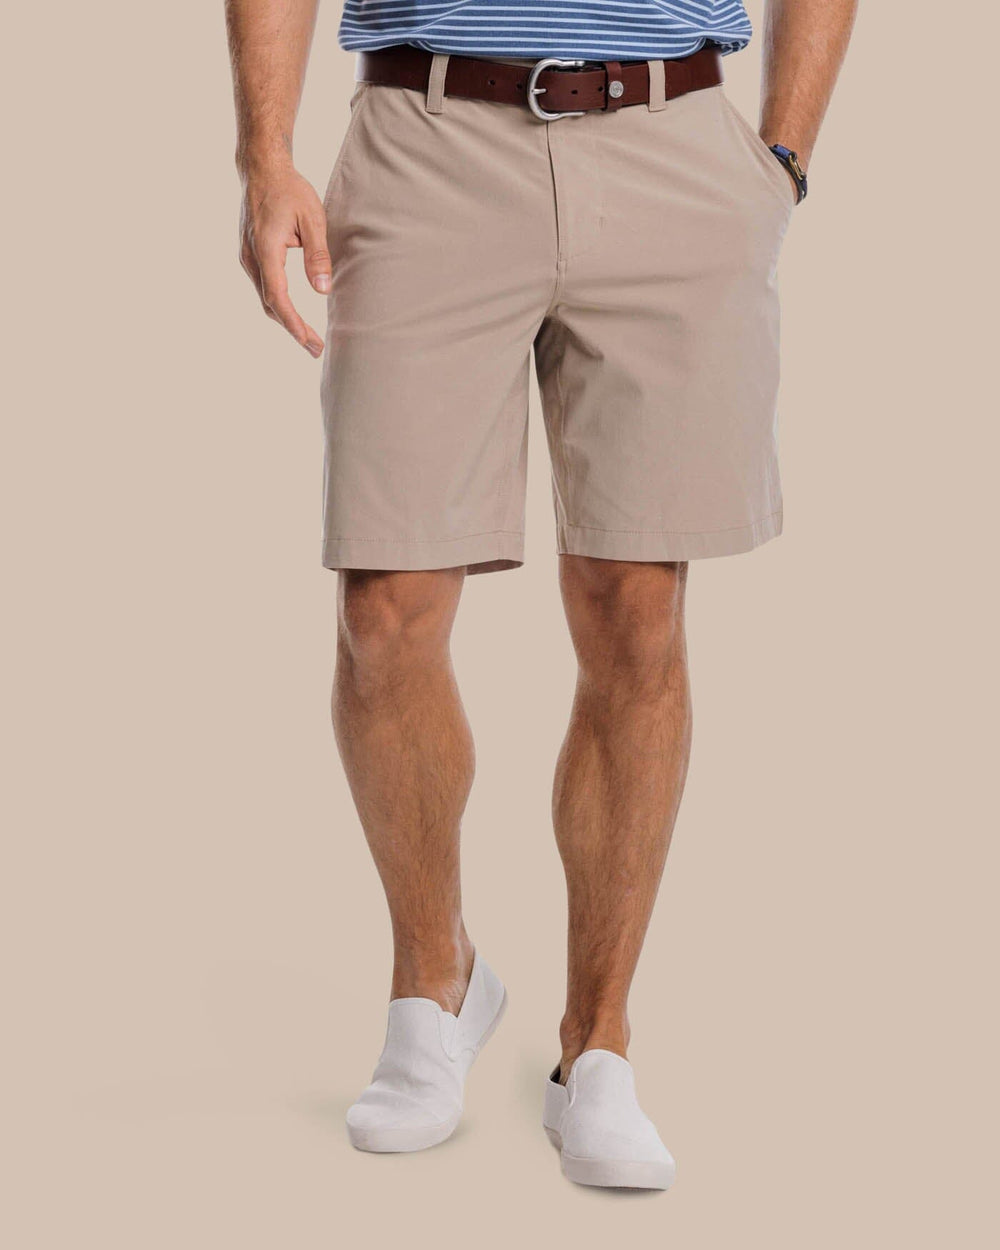 The front view of the Southern Tide T3 Gulf 9 Inch Performance Short by Southern Tide - Sandstone Khaki